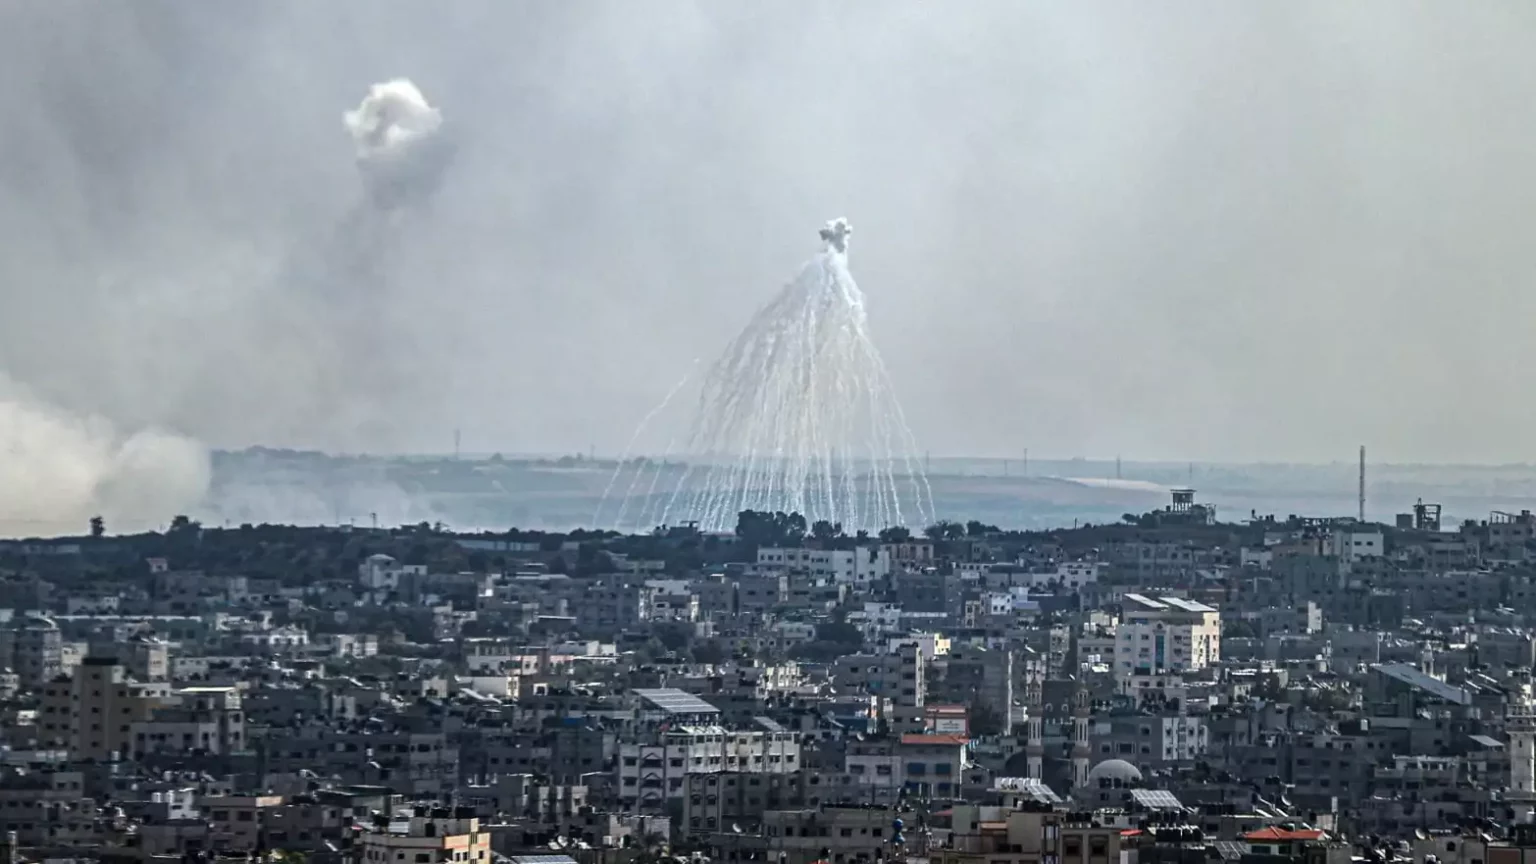 human-rights-watch-accuses-israel-of-using-white-phosphorus-in-gaza-and-lebanon-which-puts-civilians-at-risk-of-serious-injury